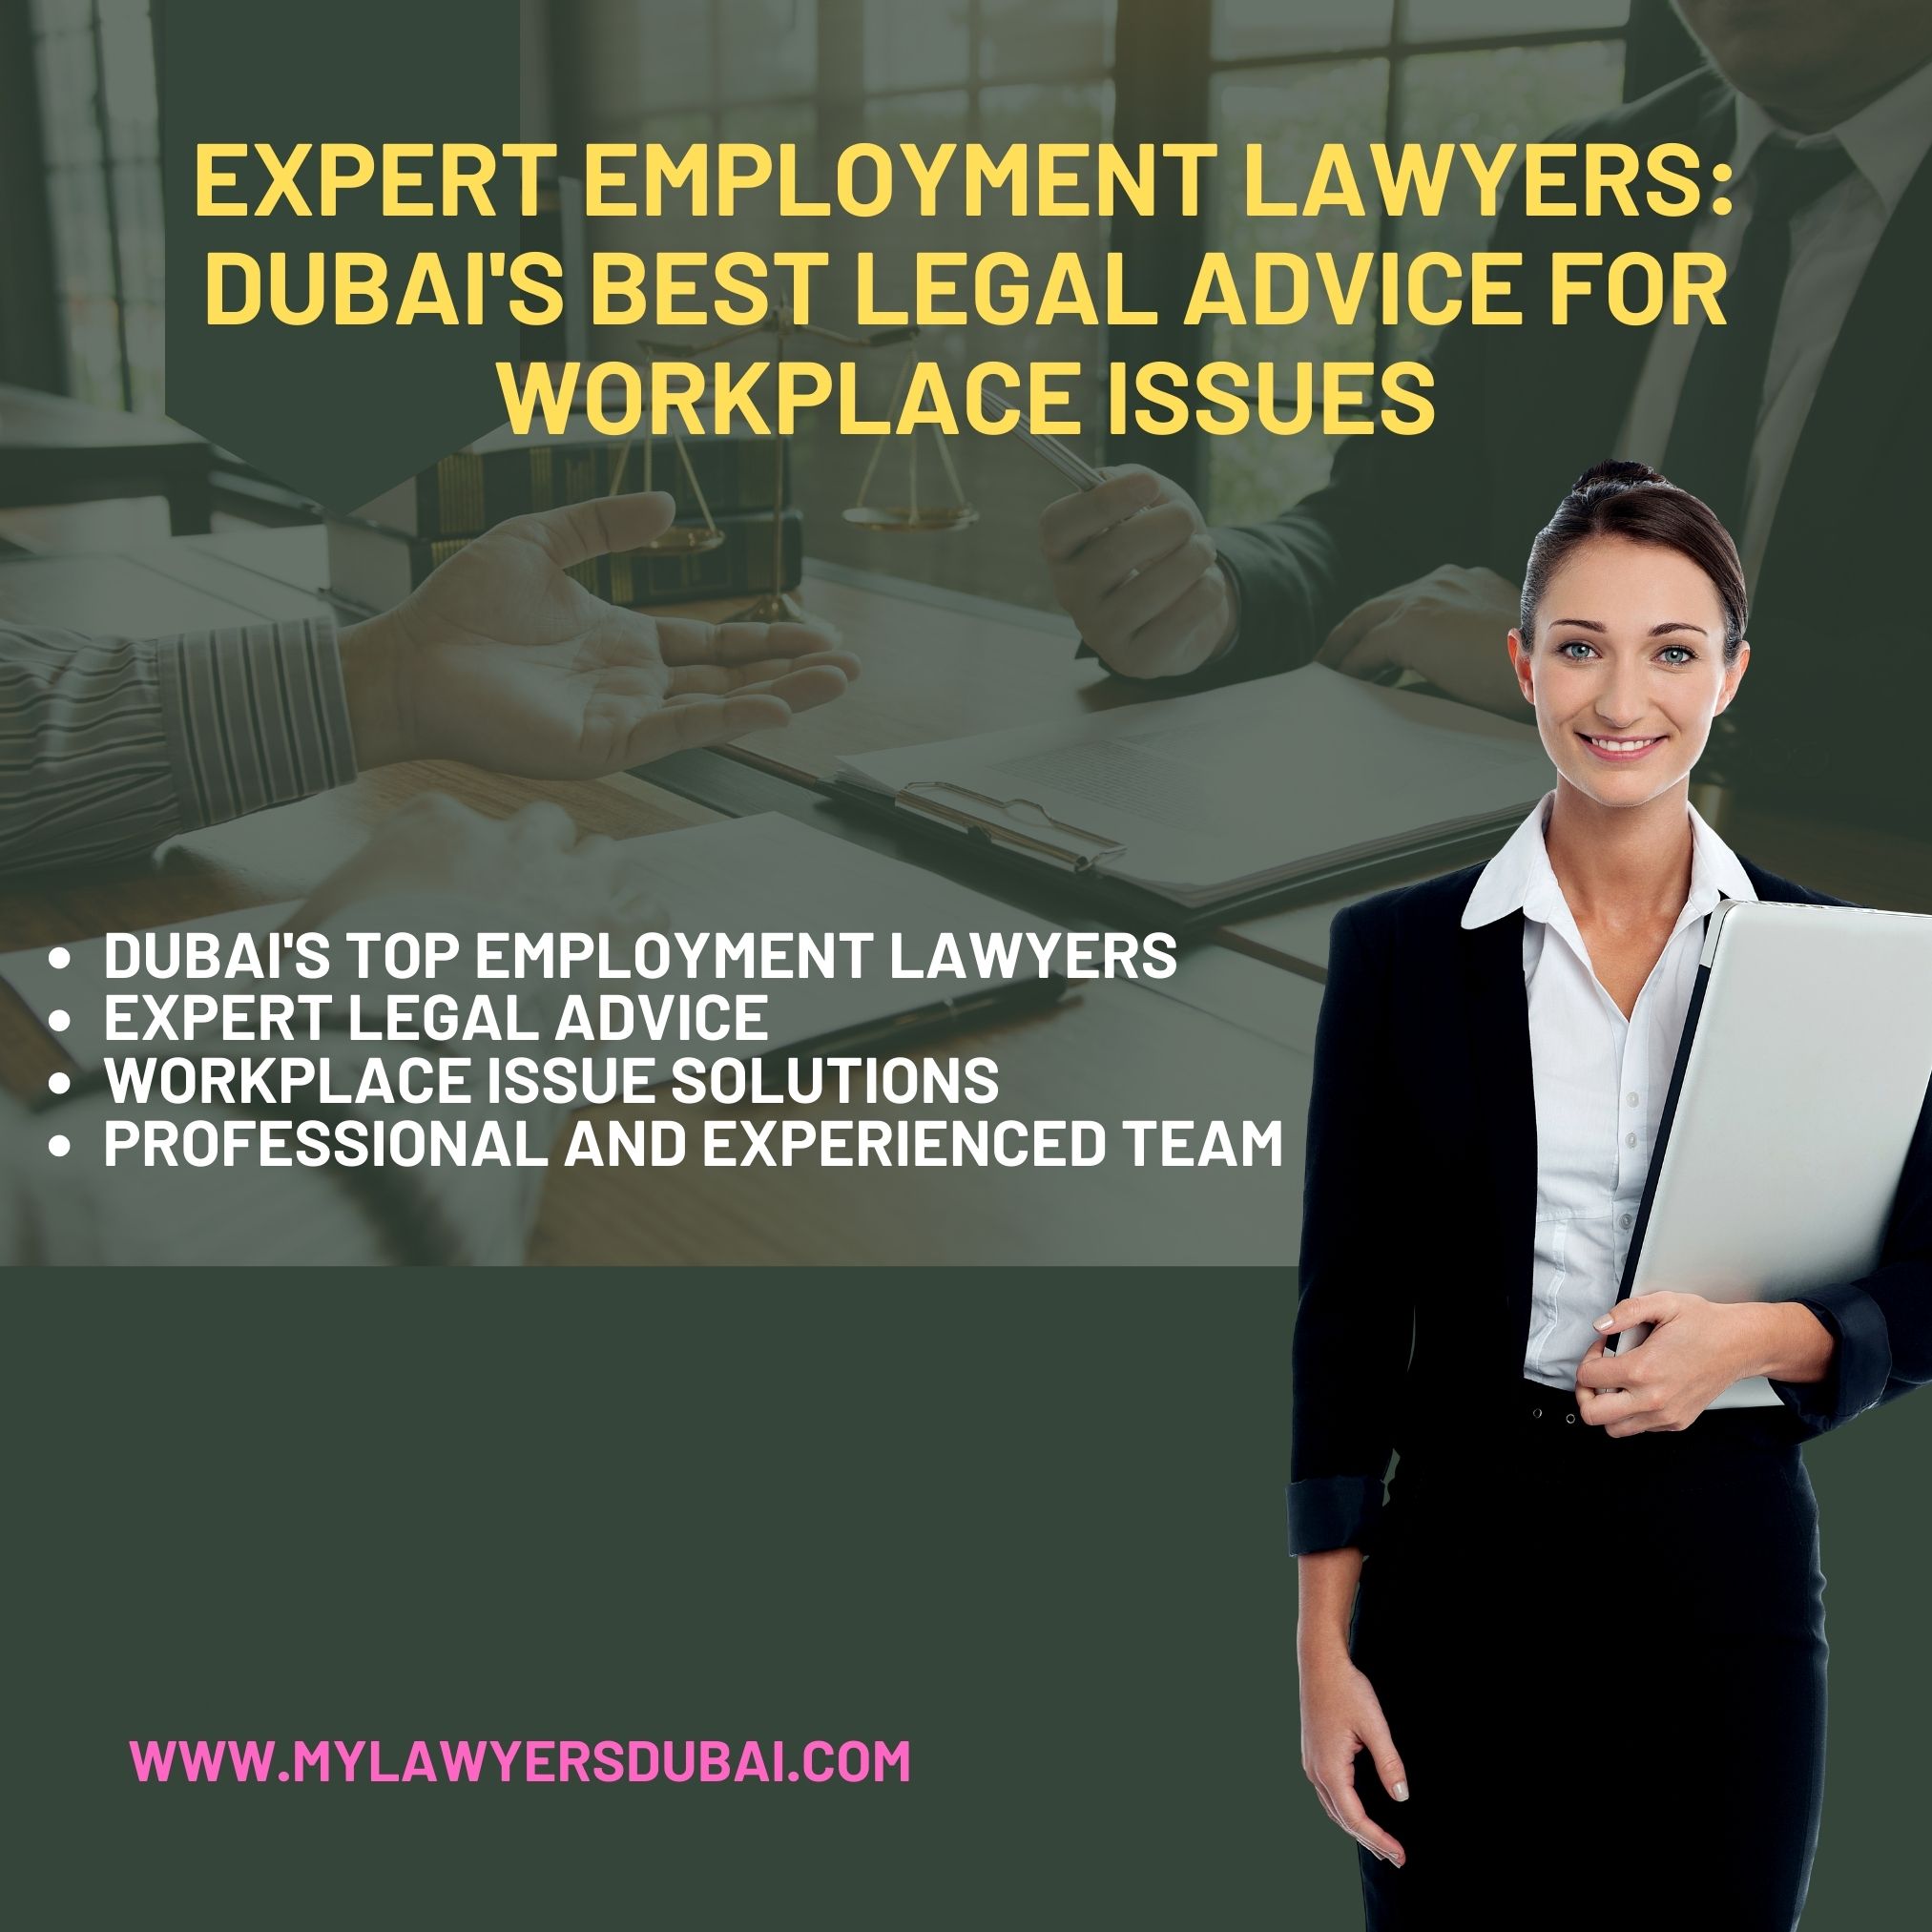 Professional Employment Lawyers for Employment Issues